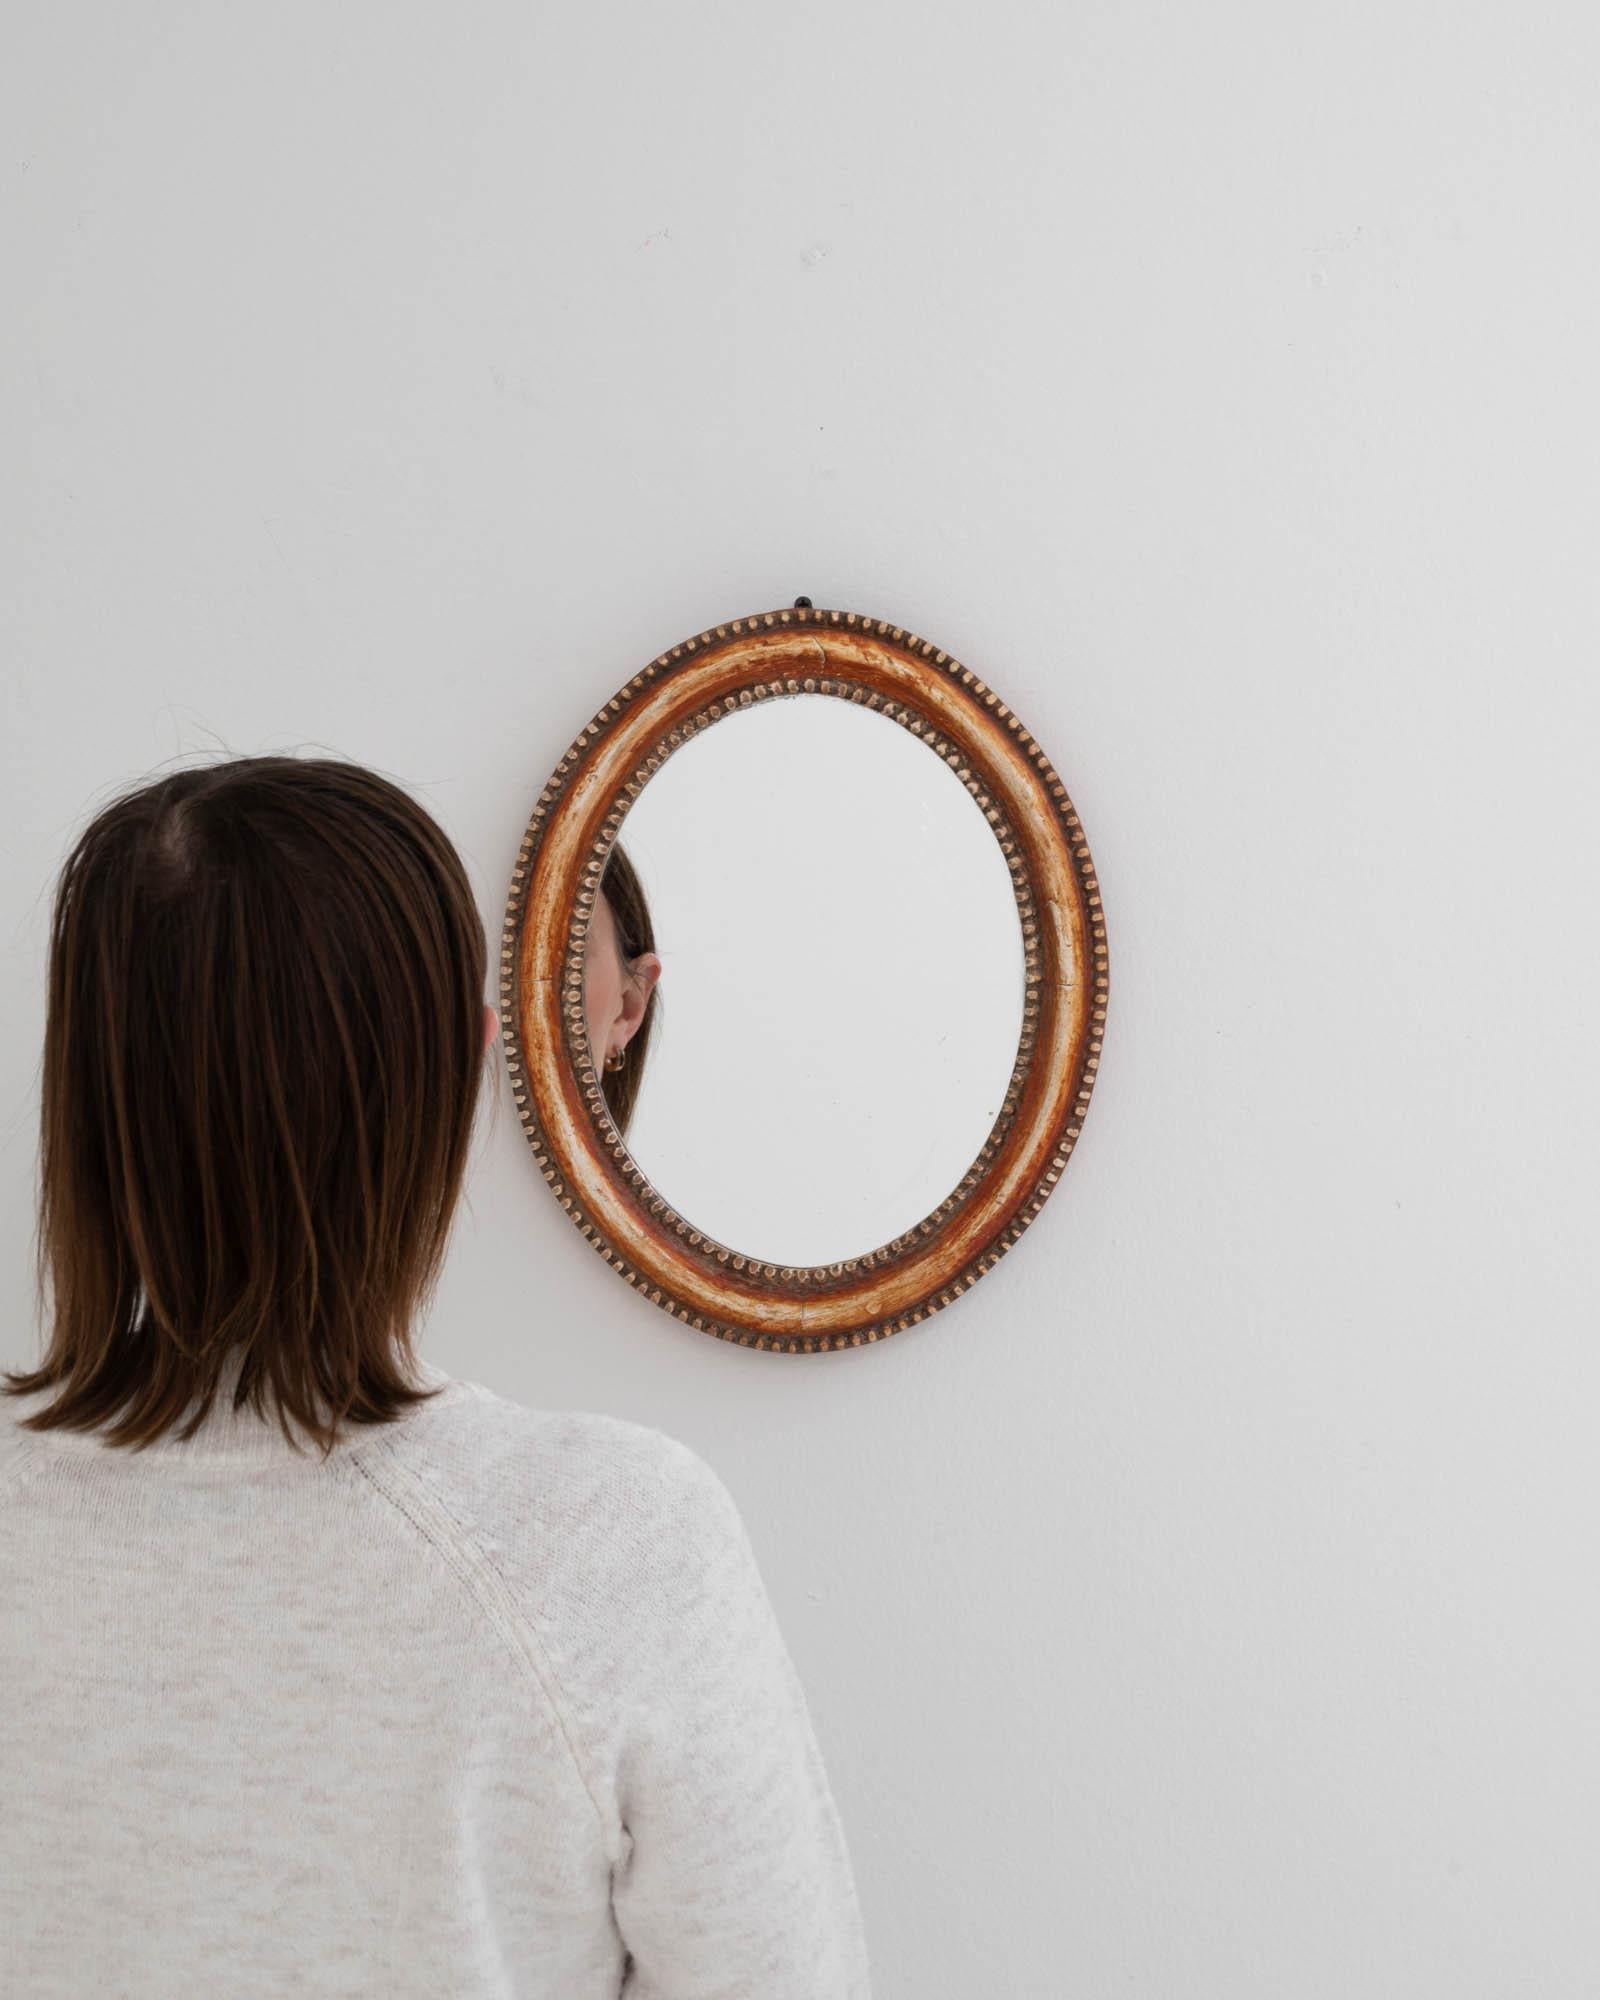 This 19th Century French wooden mirror is a charming artifact, exuding the elegance of a bygone era. The oval silhouette of the frame, adorned with intricate beading and subtle ornamentation, hints at the delicate craftsmanship of the period. The